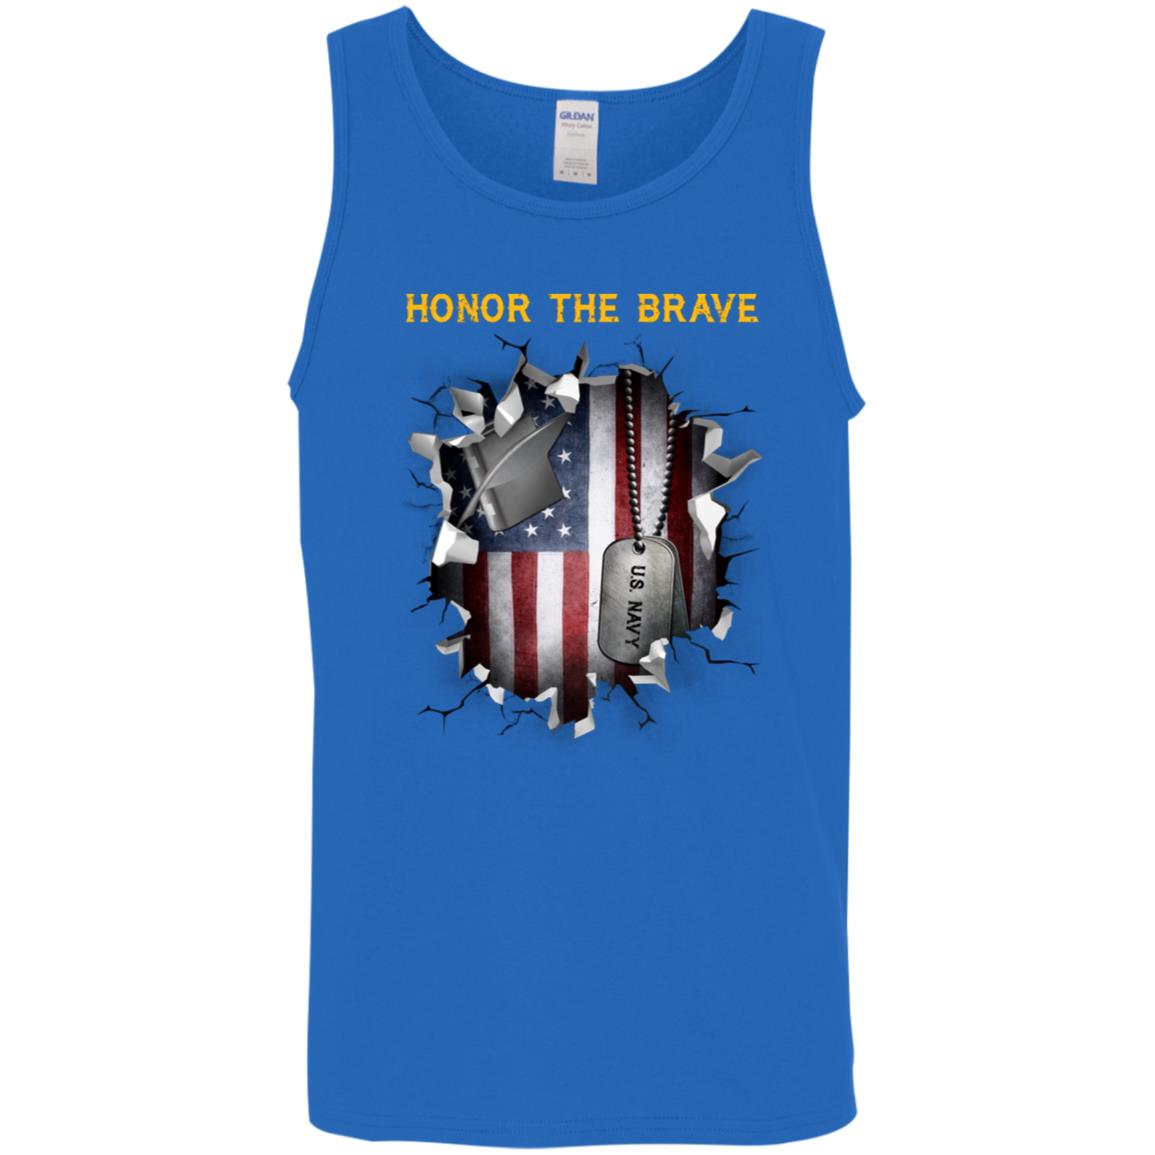 Navy Personnel Specialist Navy PS - Honor The Brave Front Shirt